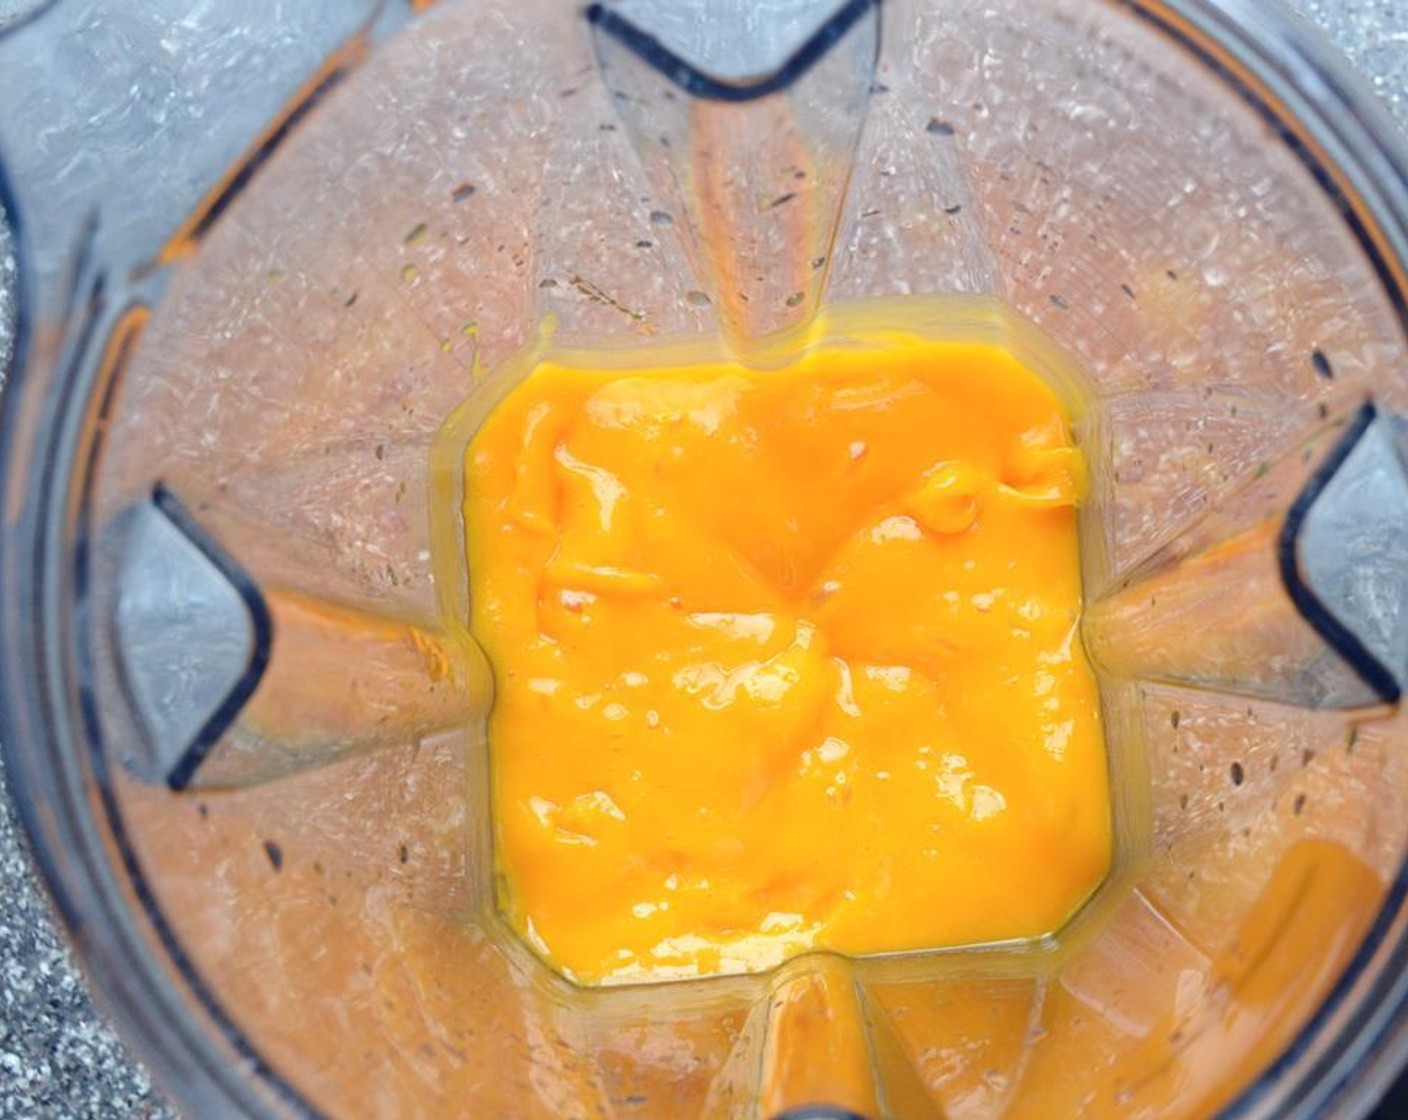 step 3 Blend or process until smooth. If the mango is particularly pulpy, pour the puree through a strainer to remove any fibrous pieces. You should have about 1 3/4 to 2 cups of mango puree.